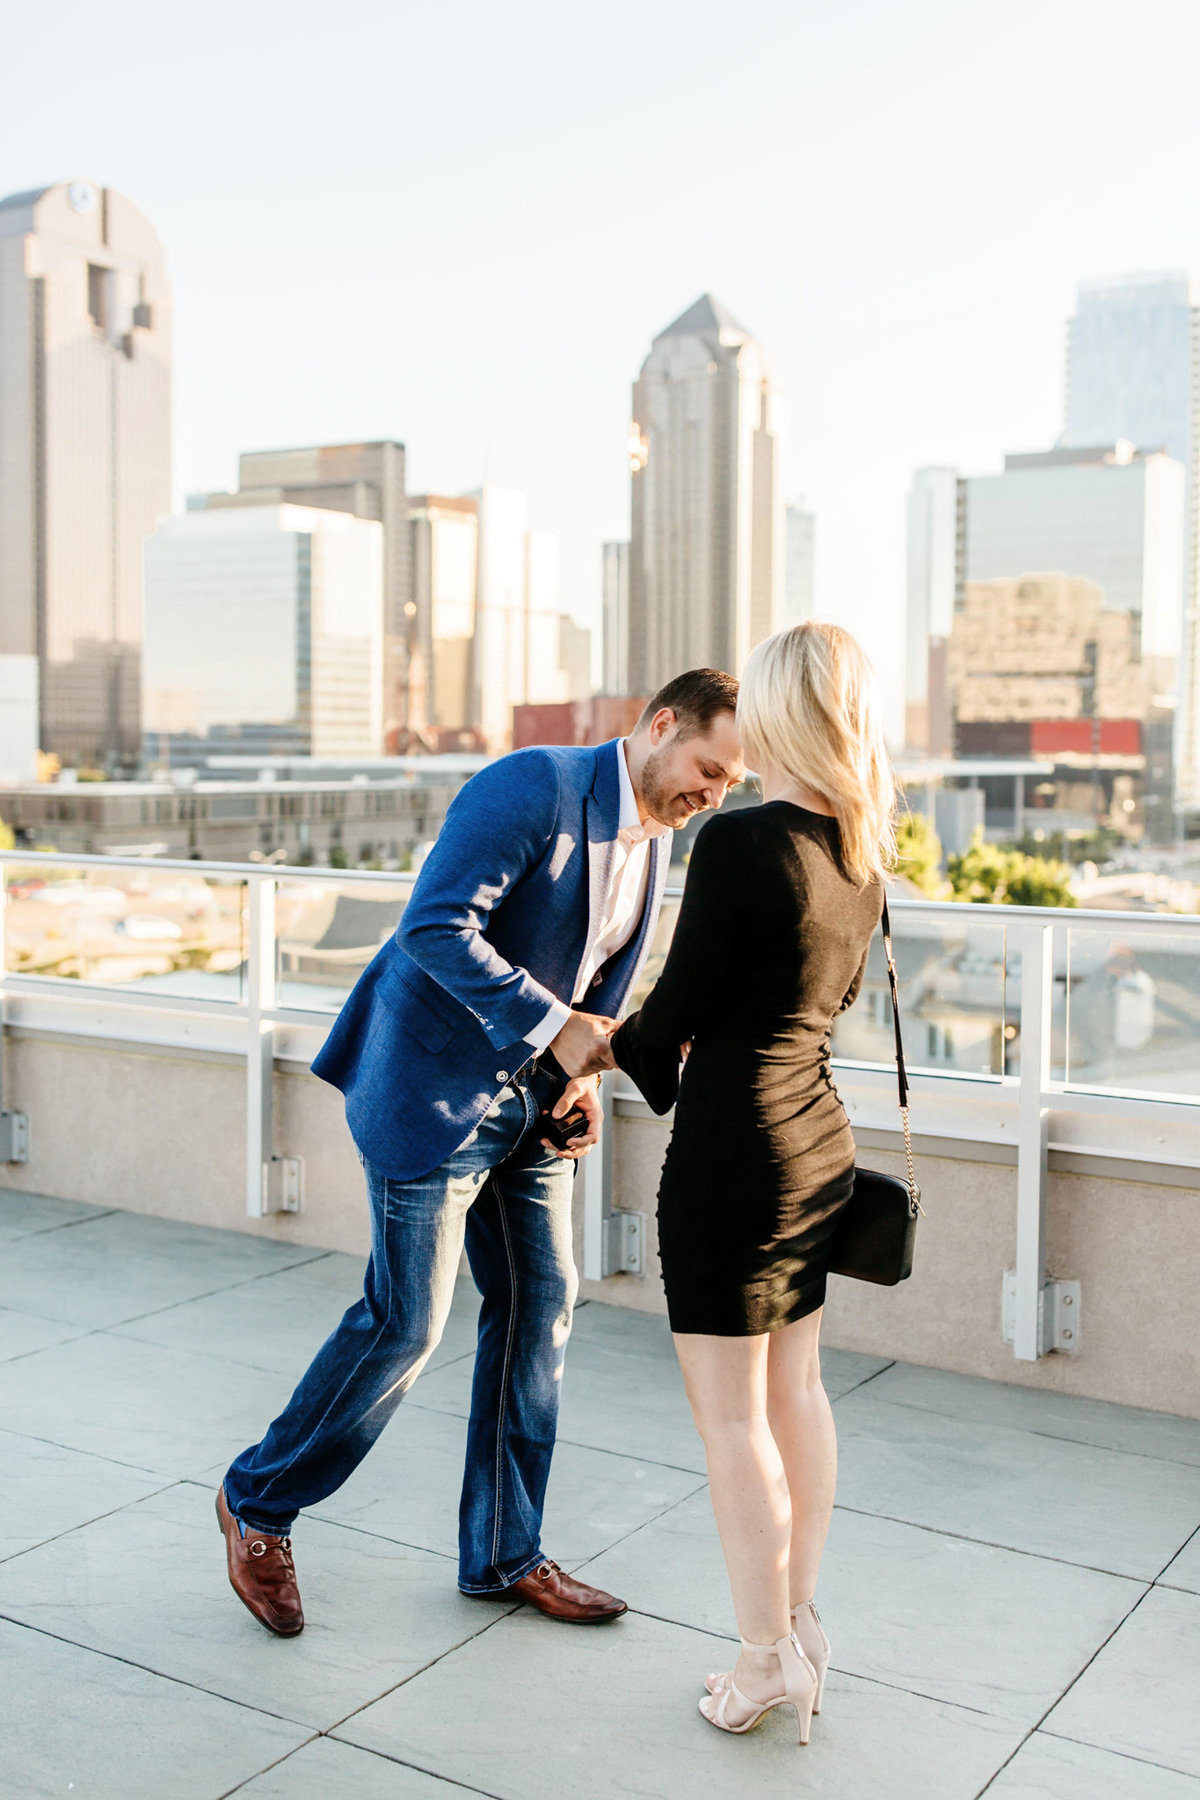 Eric & Megan - Downtown Dallas Rooftop Proposal & Engagement Session-24